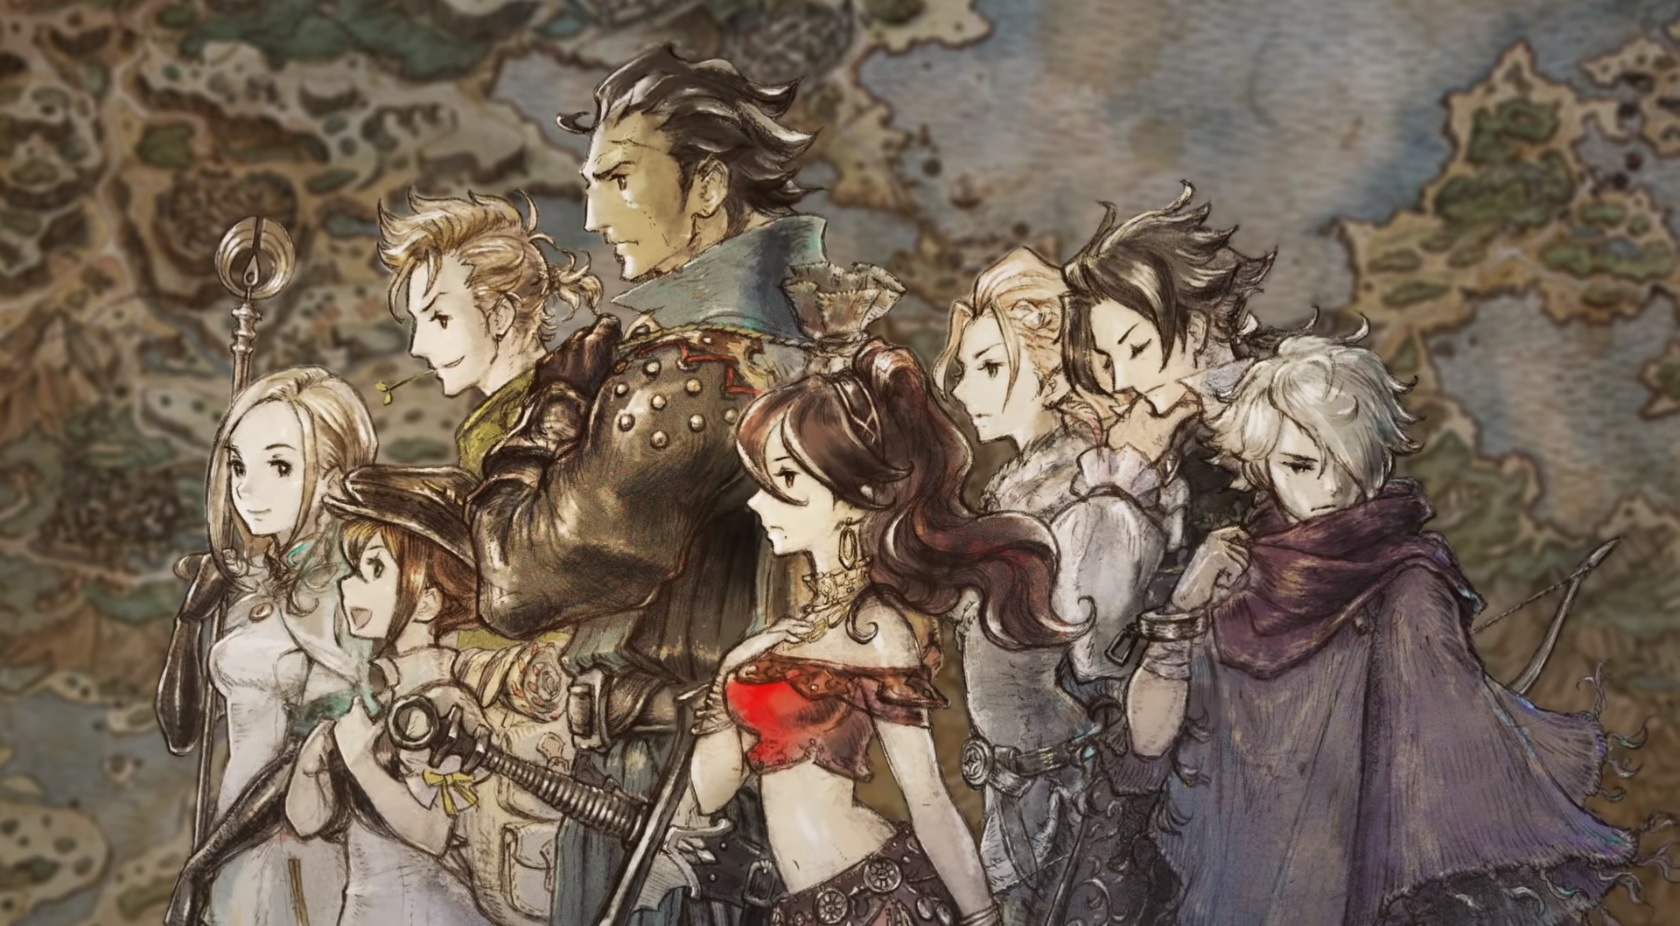 octopath traveler 2 switch download